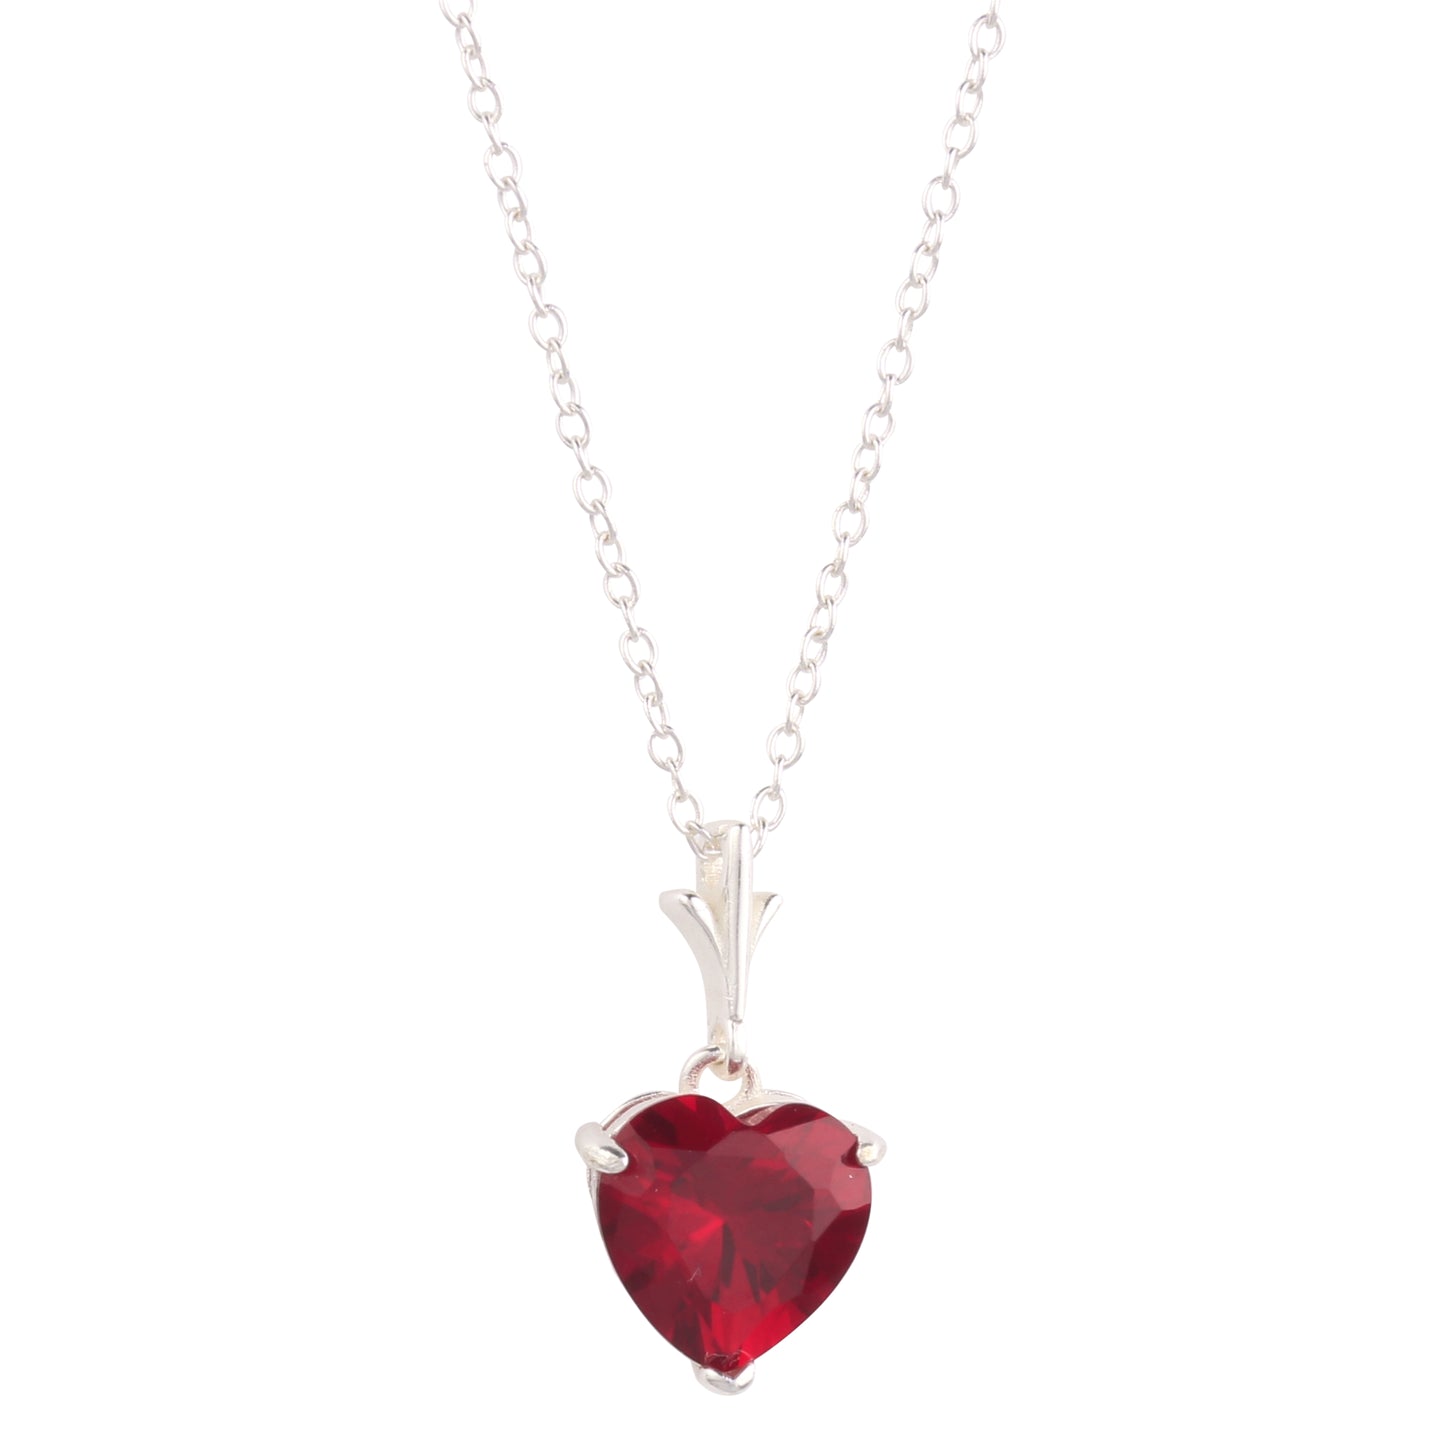 BlingStop 925 Sterling Silver Red Heart Pendant Necklace